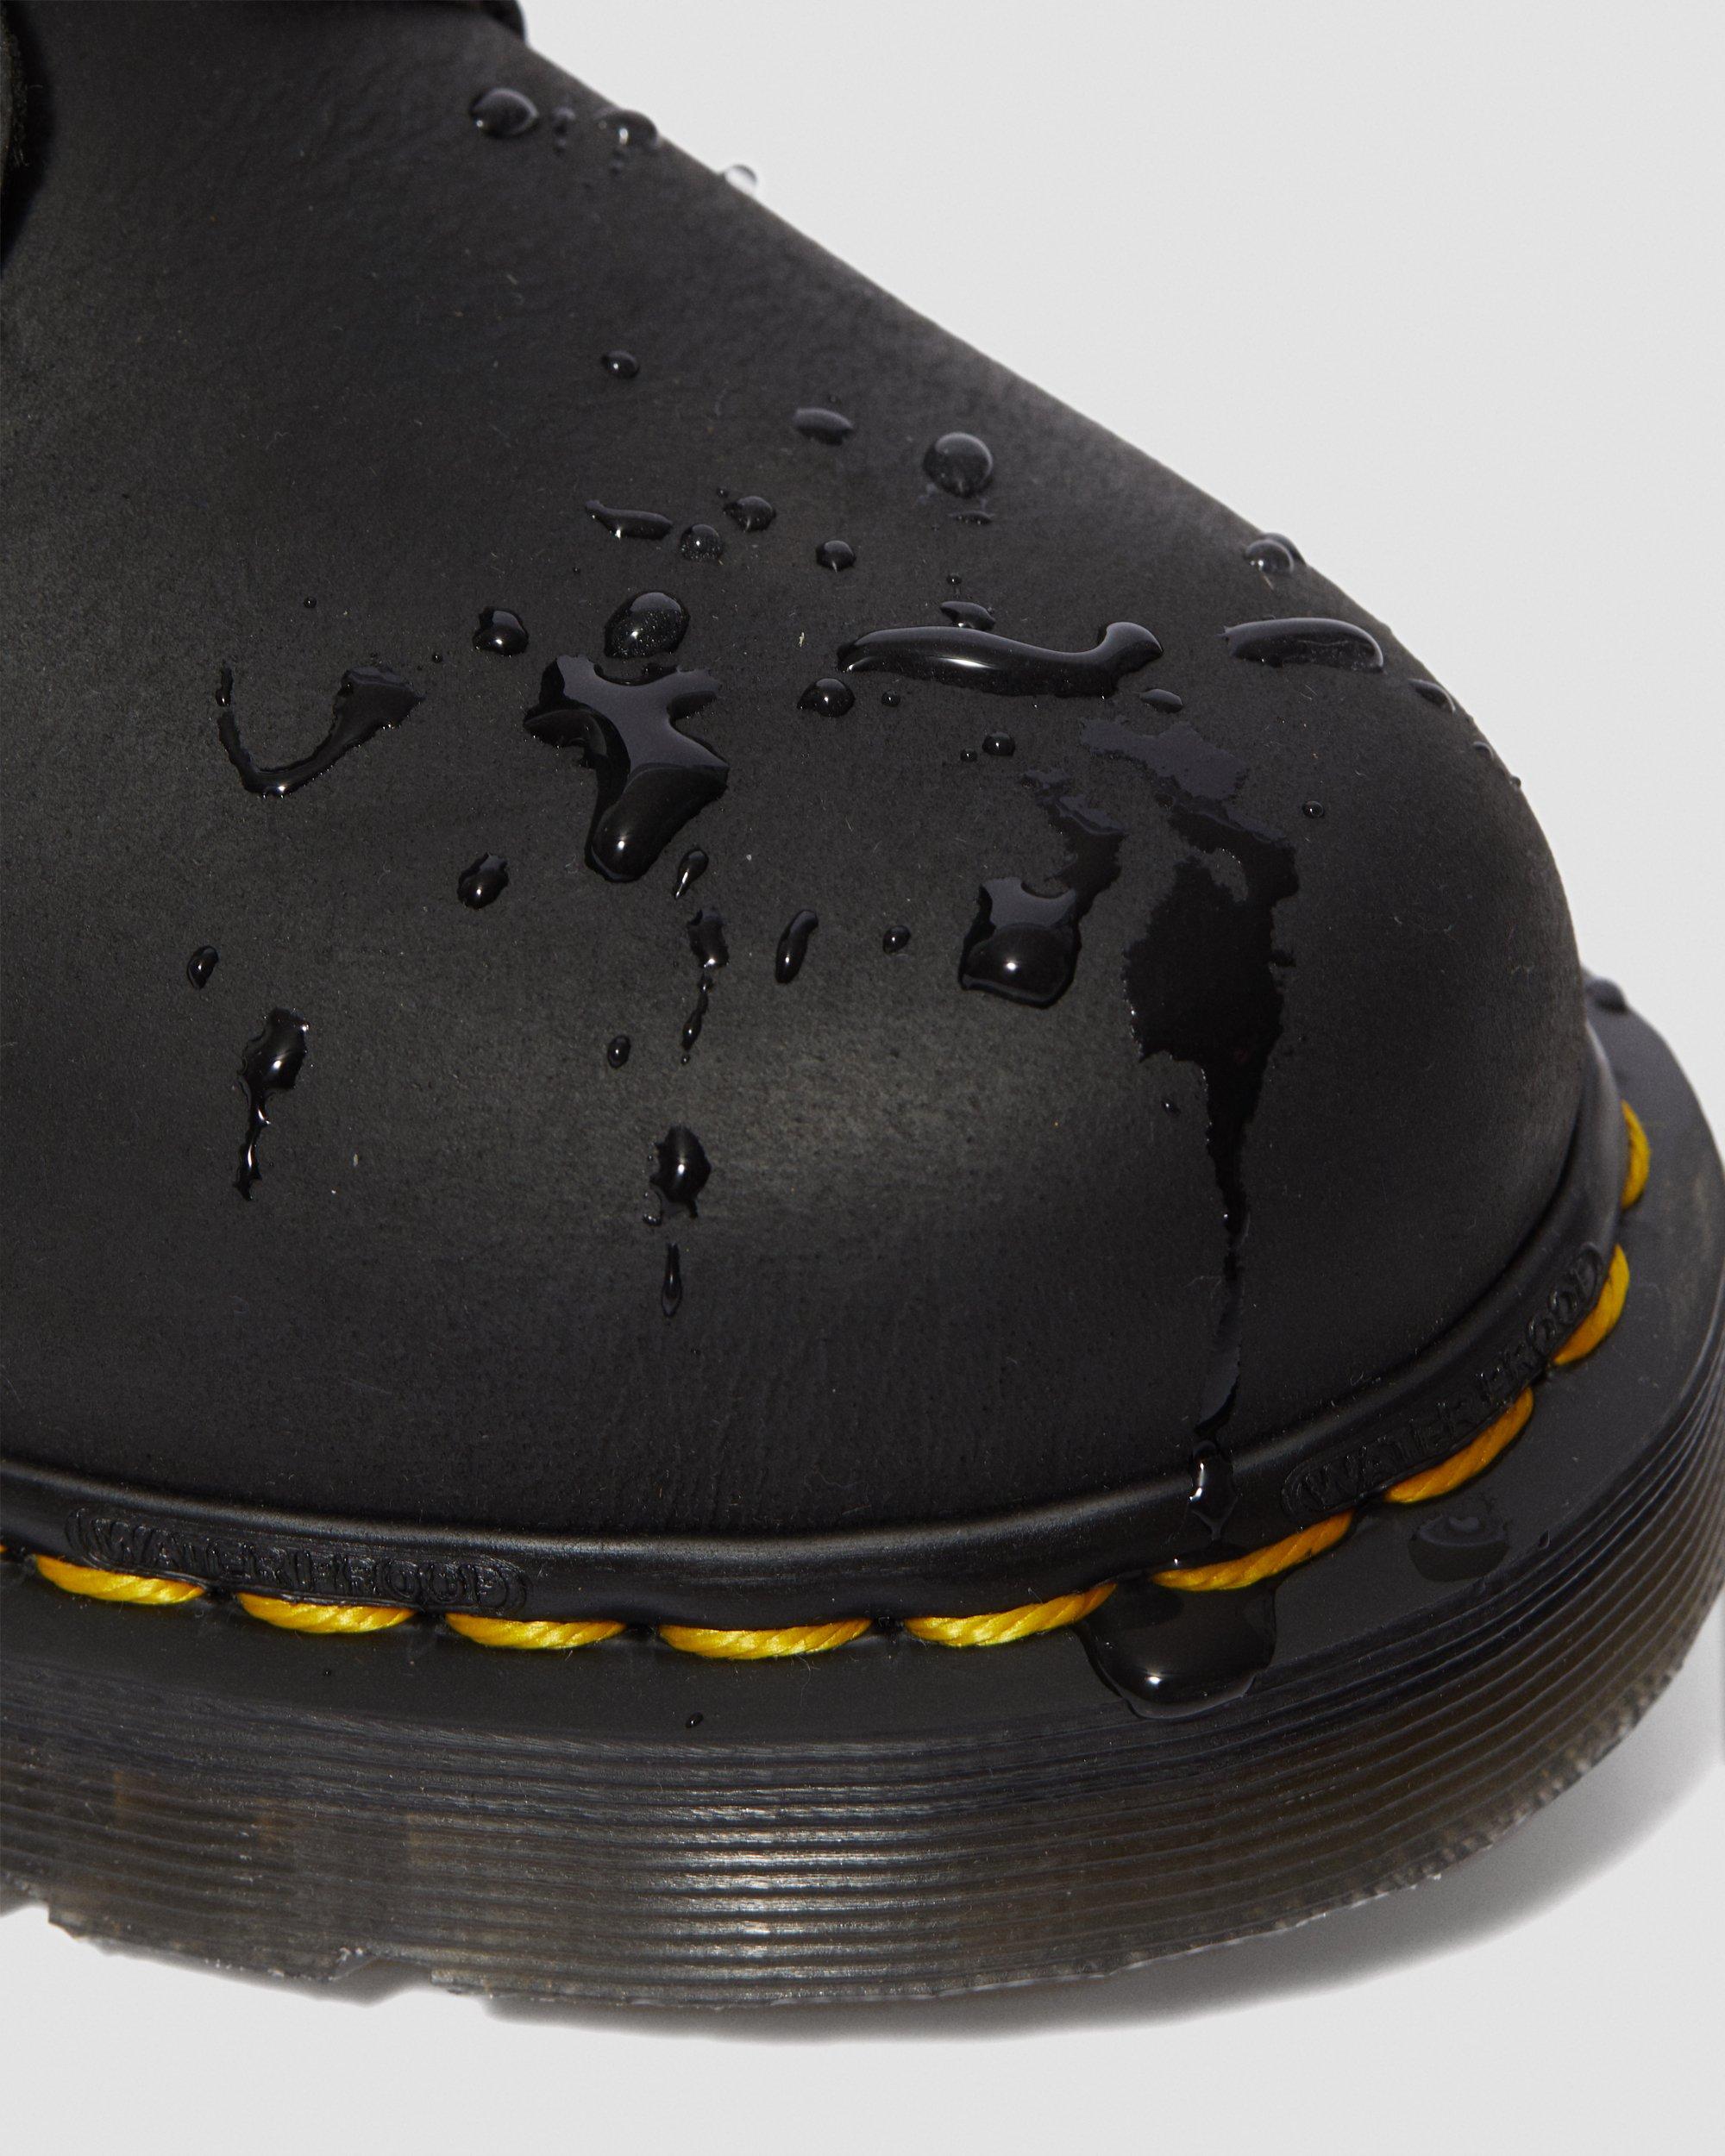 WATERPROOF LACE UP BOOTS | Dr. Martens